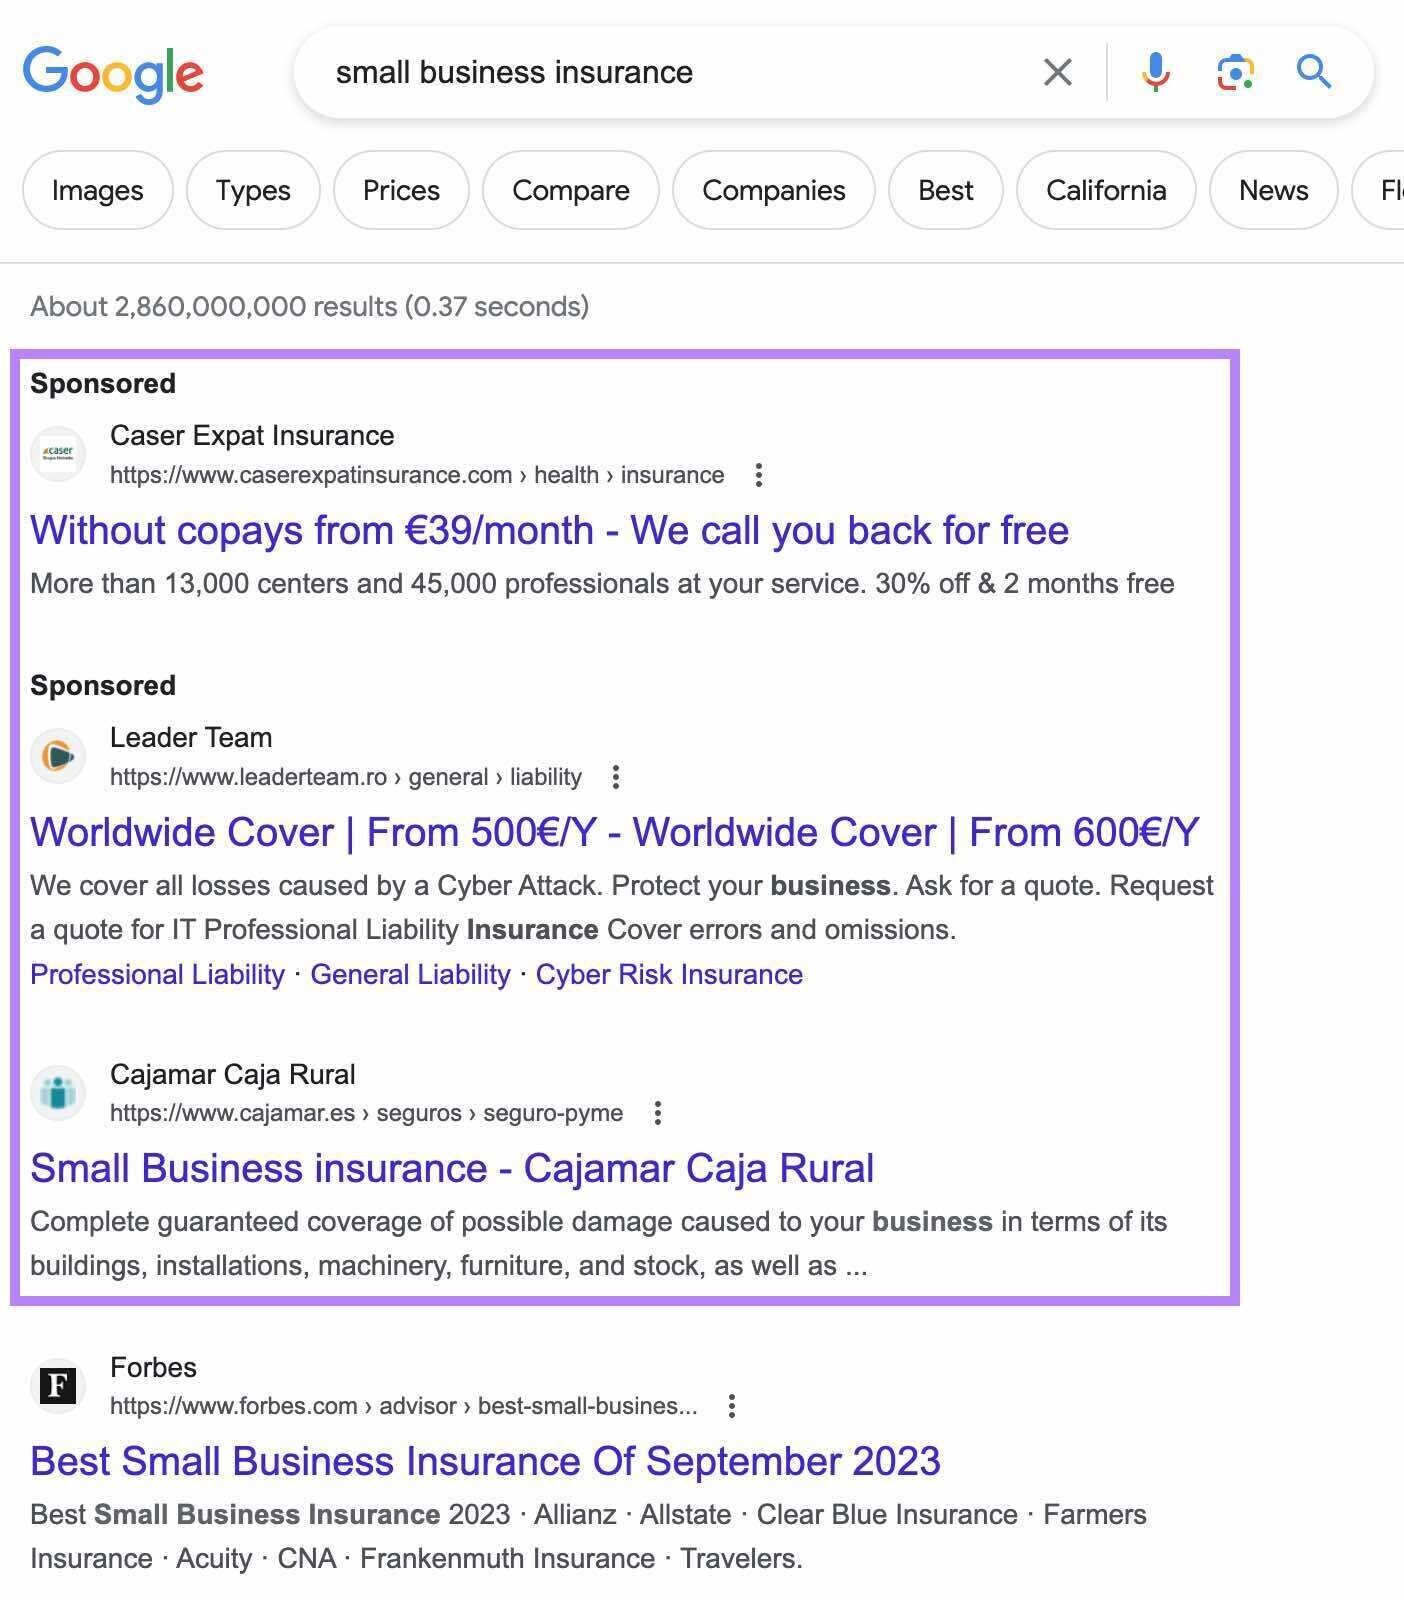 examples of paid search results on Google SERP labeled ‘Sponsored’